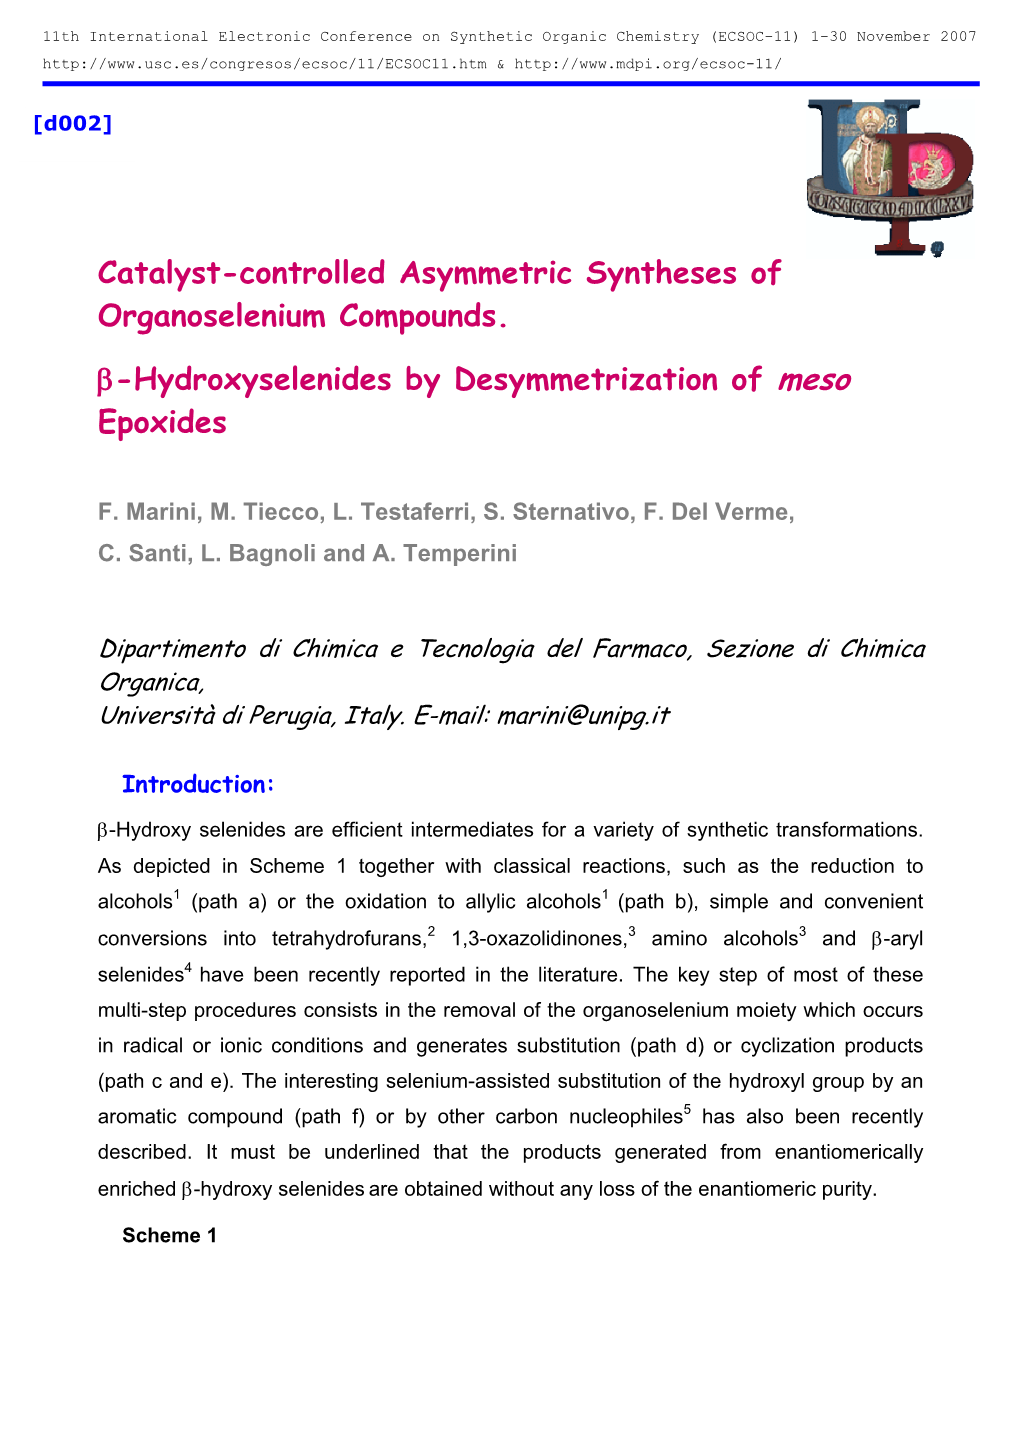 Catalyst-Controlled Asymmetric Syntheses of Organoselenium Compounds